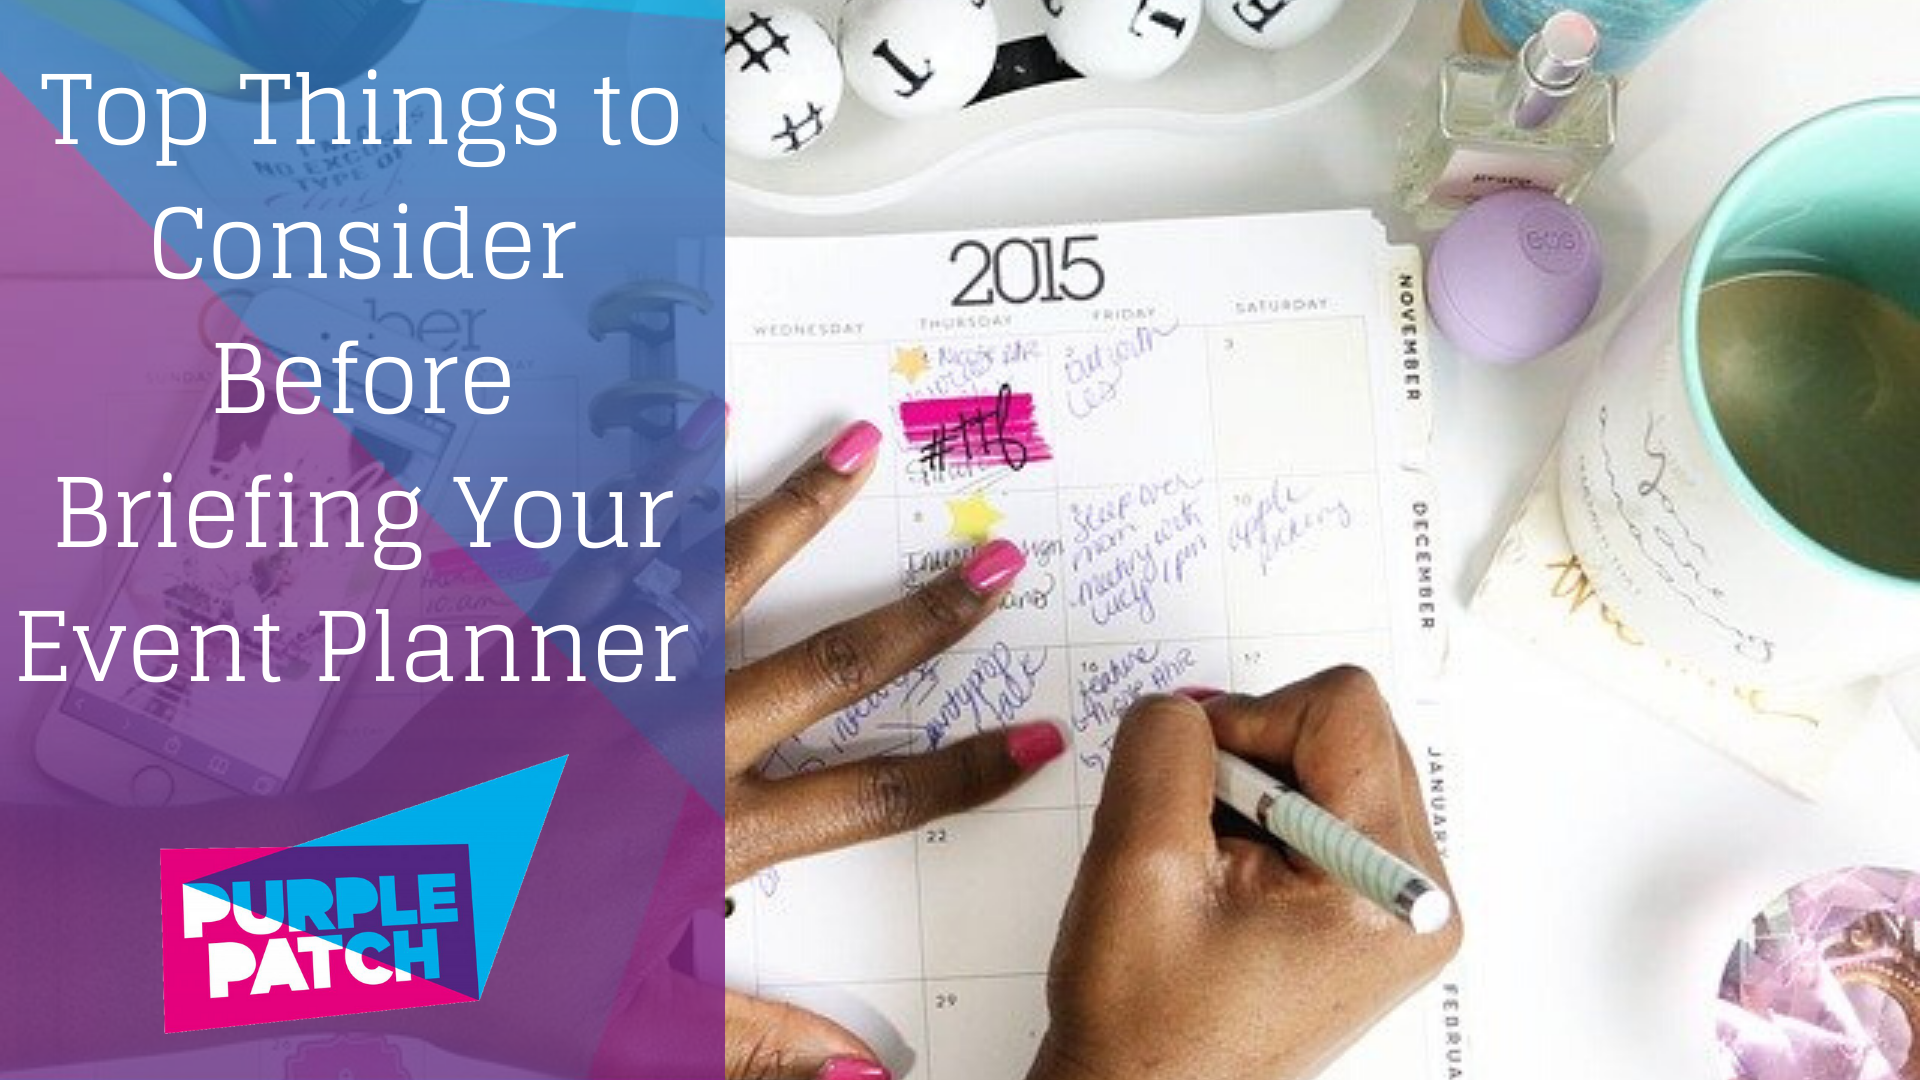 Top 10 Things to Consider Before Briefing Your Event Planner